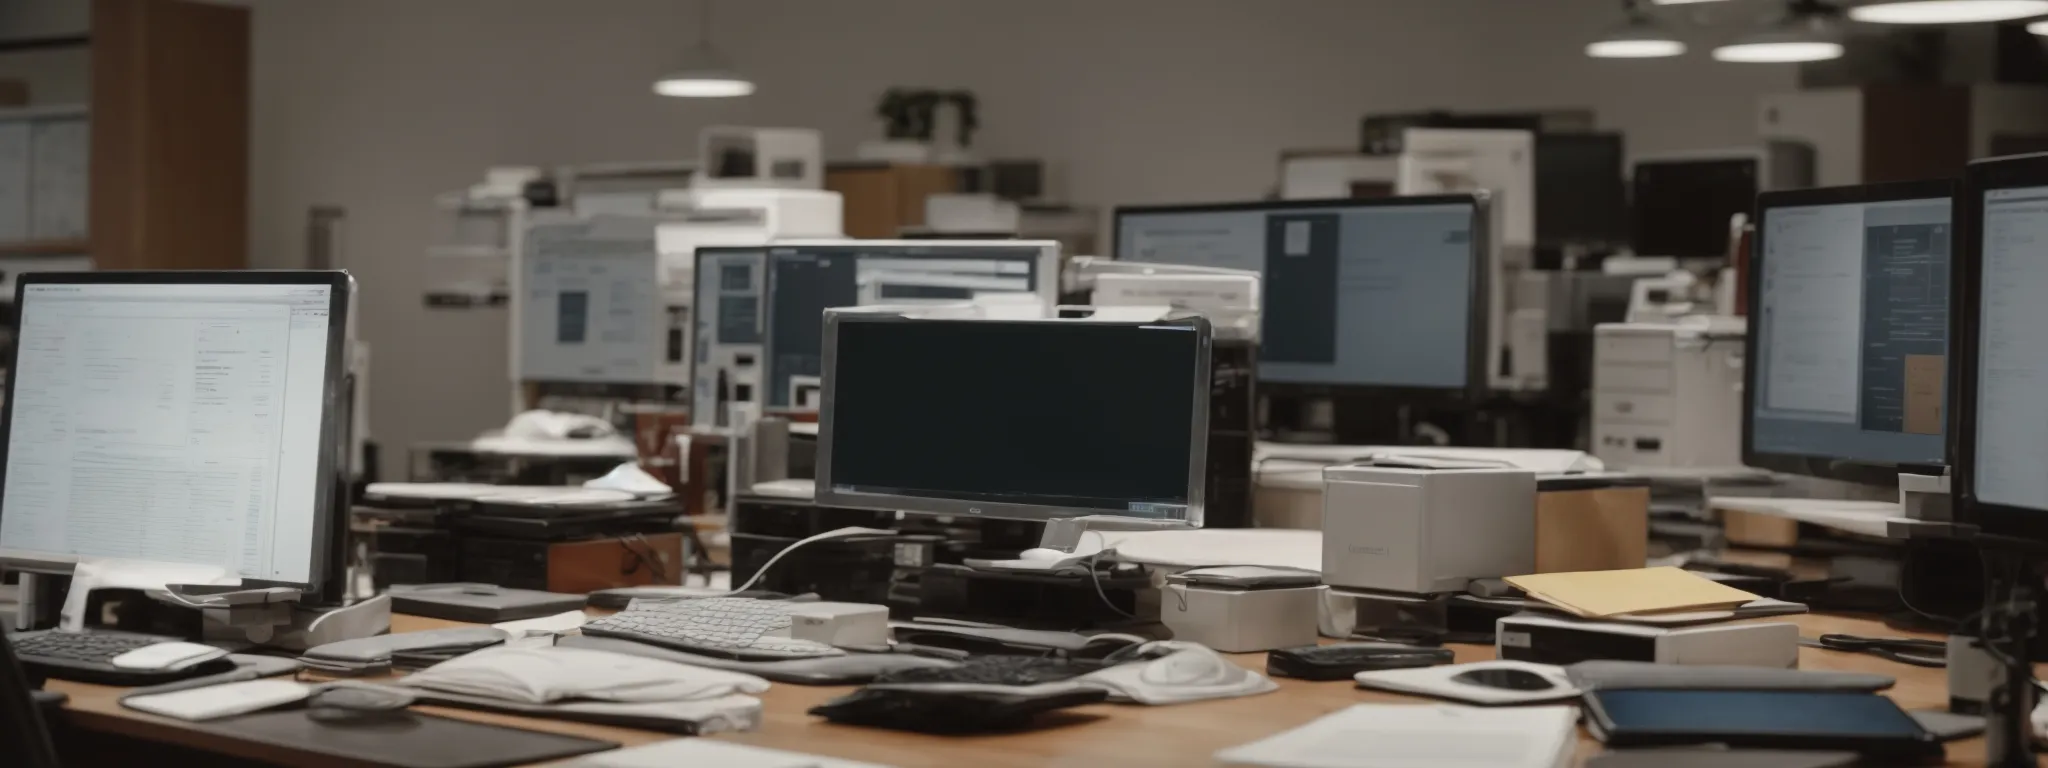 a clutter-free office space with a computer running contact management software on its screen amidst modern office supplies.